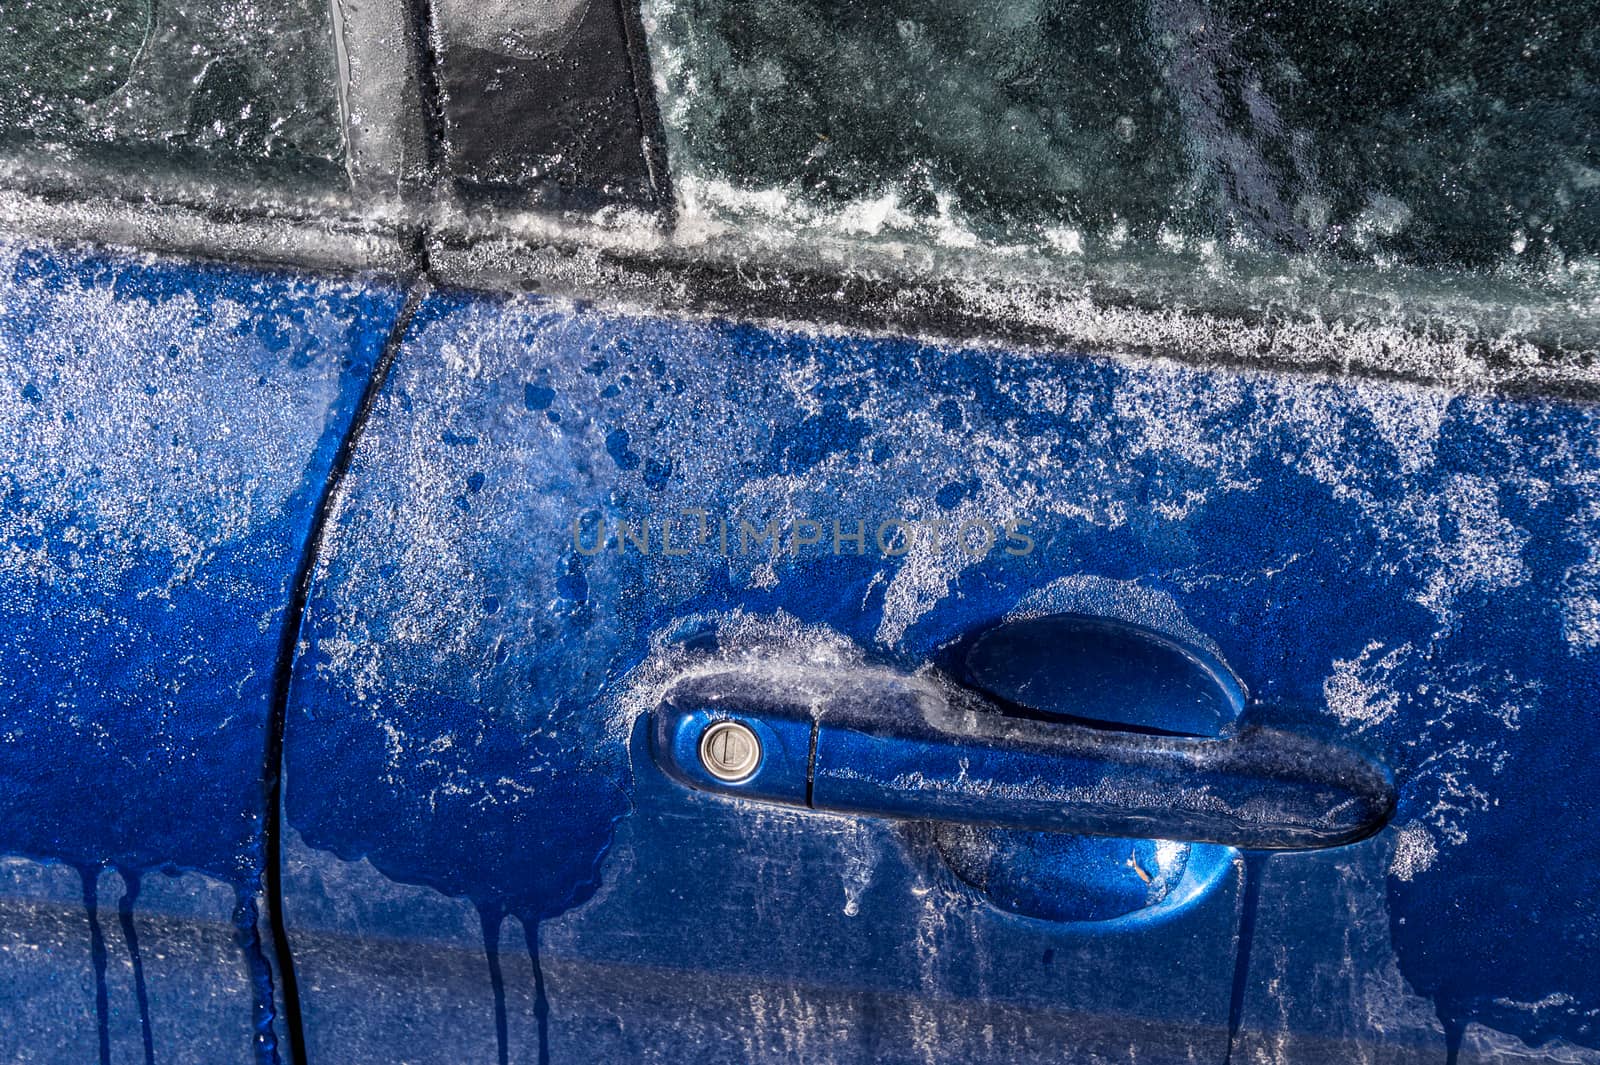 Thick layer of ice covering car after freezing rain in Montreal, by mbruxelle